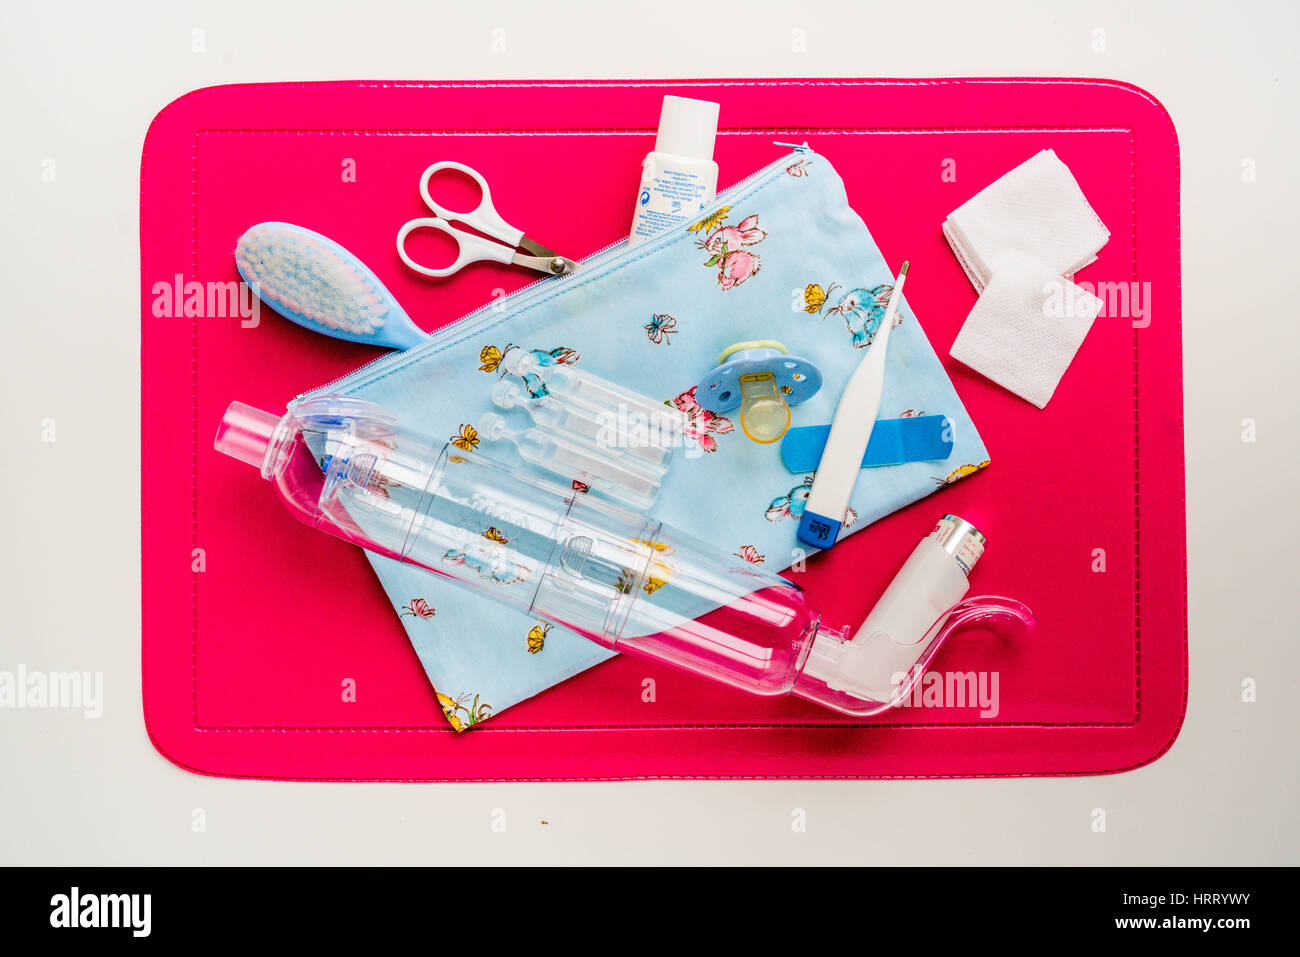 Treatment of asthma for a baby , bronchodilator aerosol with inhalation chamber. Stock Photo